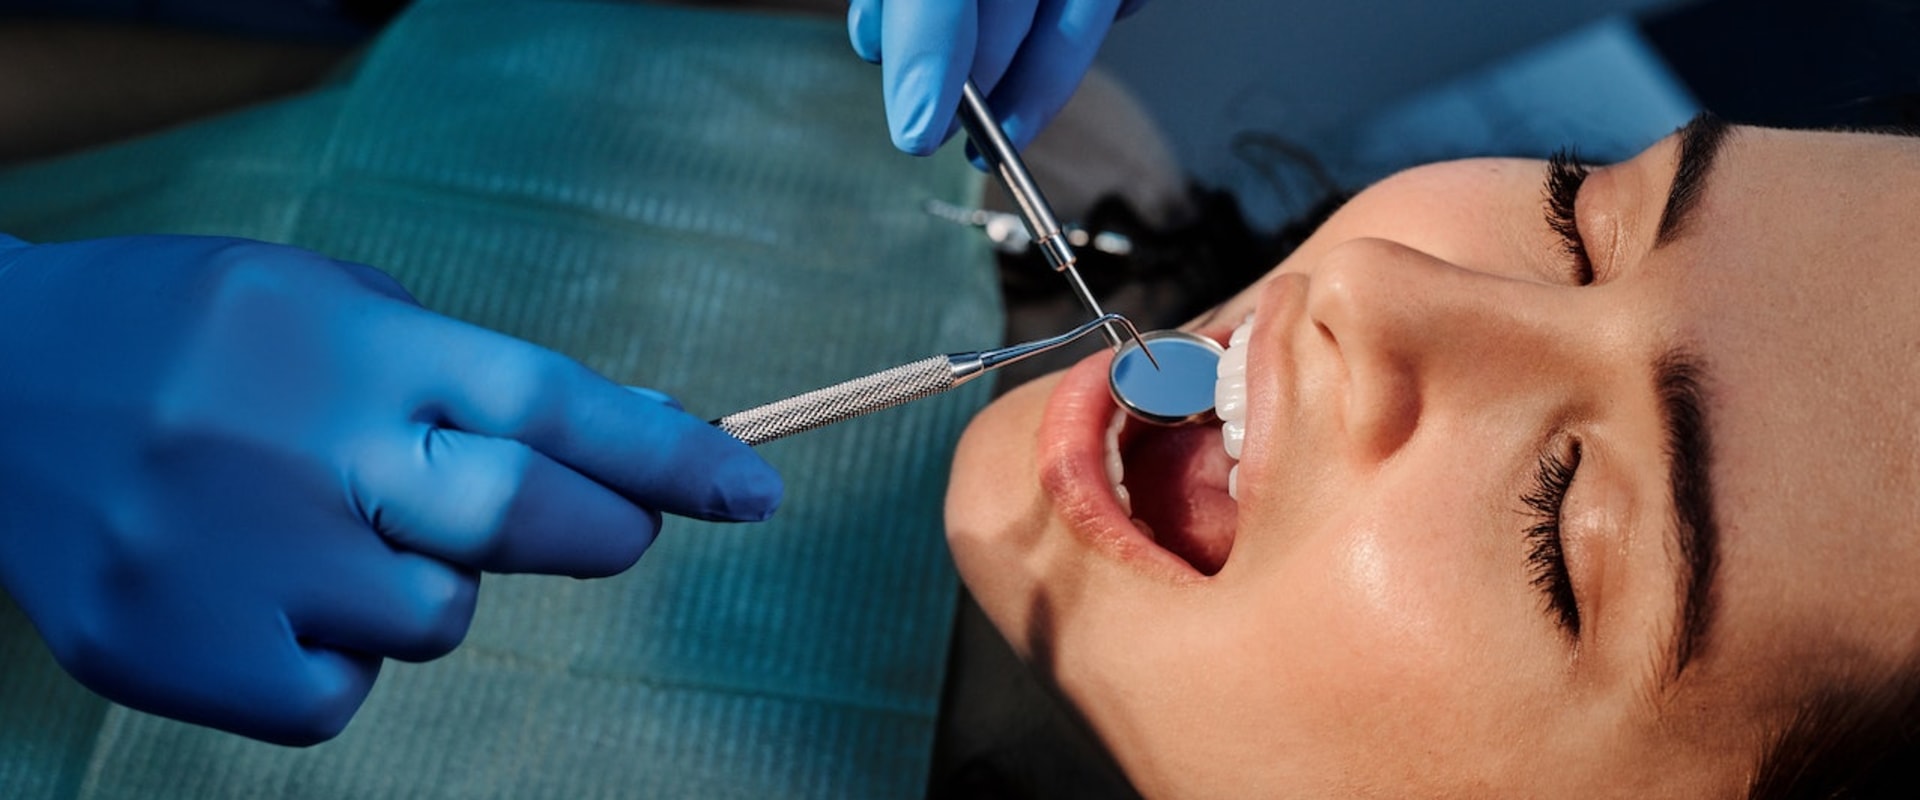 The Basics Of General Dentistry In Waco: What You Need To Know As A Patient